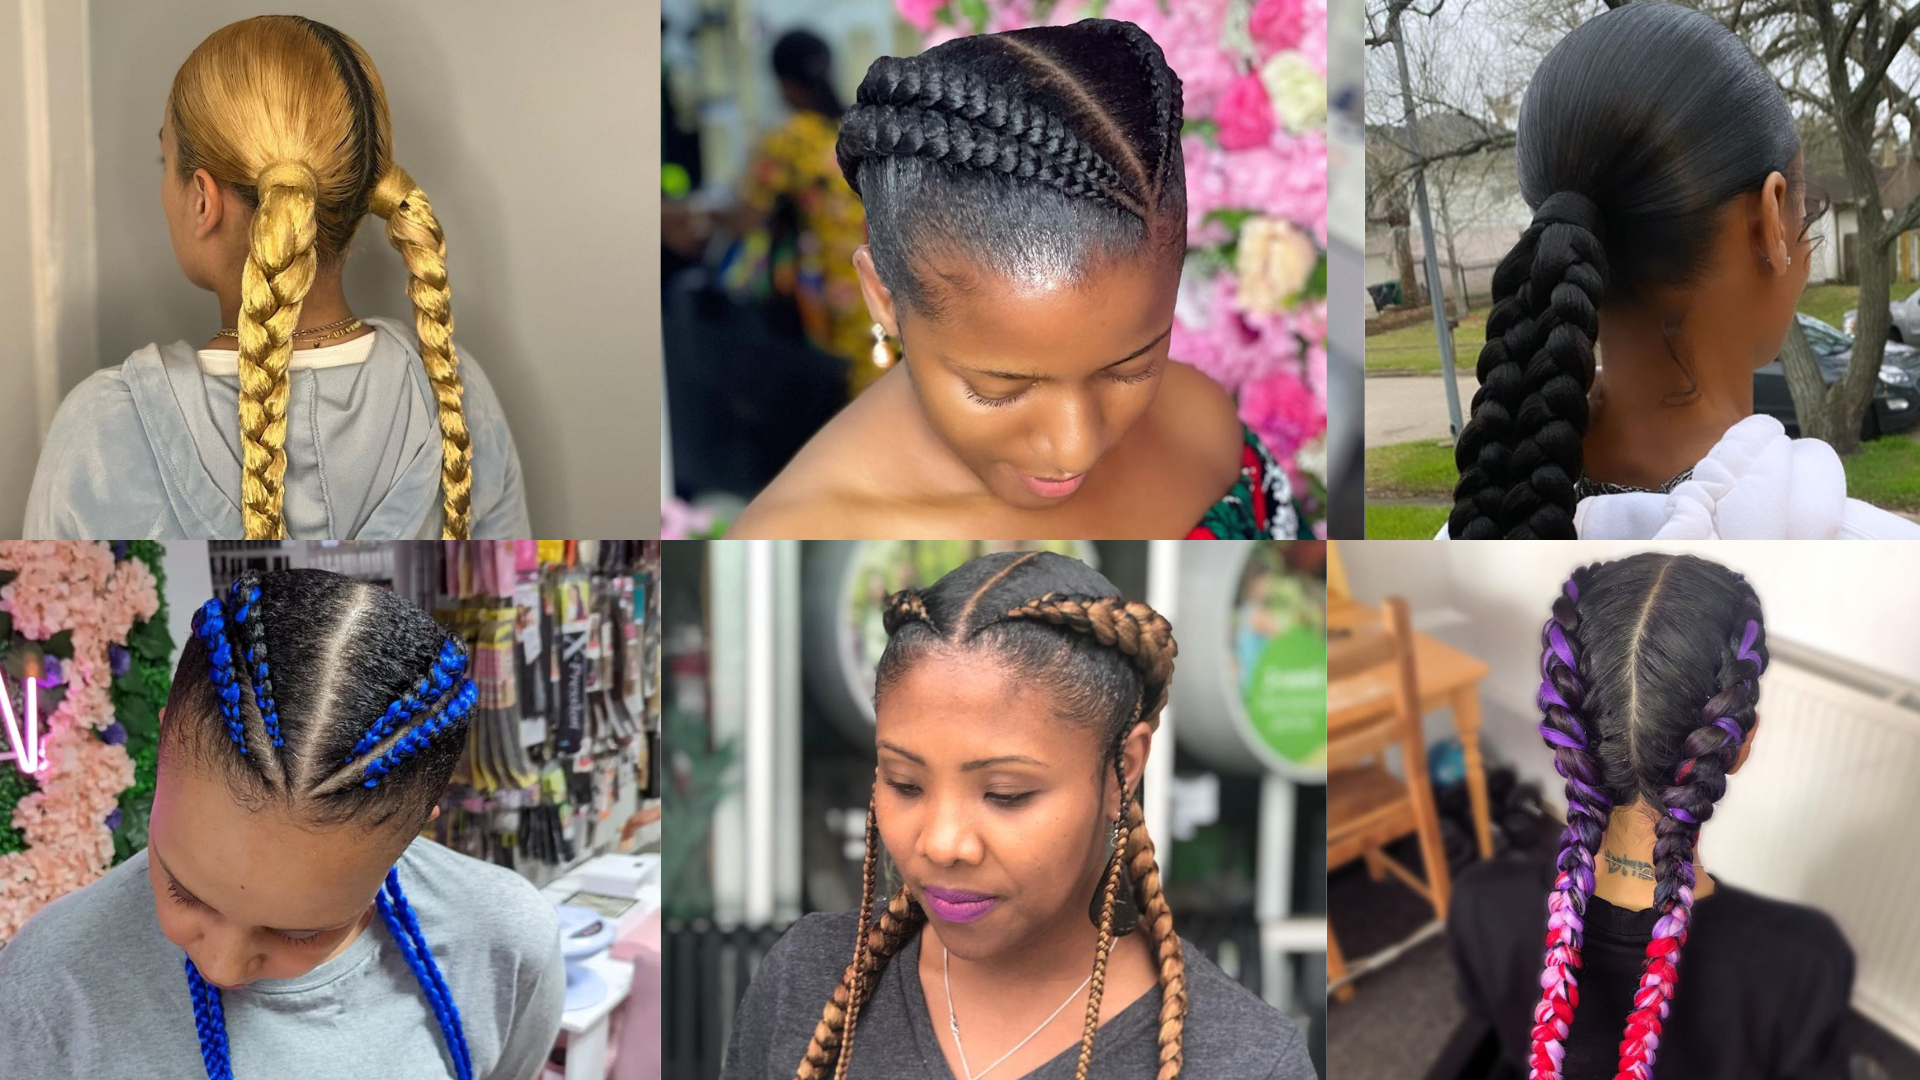 Little Black Girl braided Hairstyles 2022: Most Gorgeous Braids for  children in this festive season - YouTube